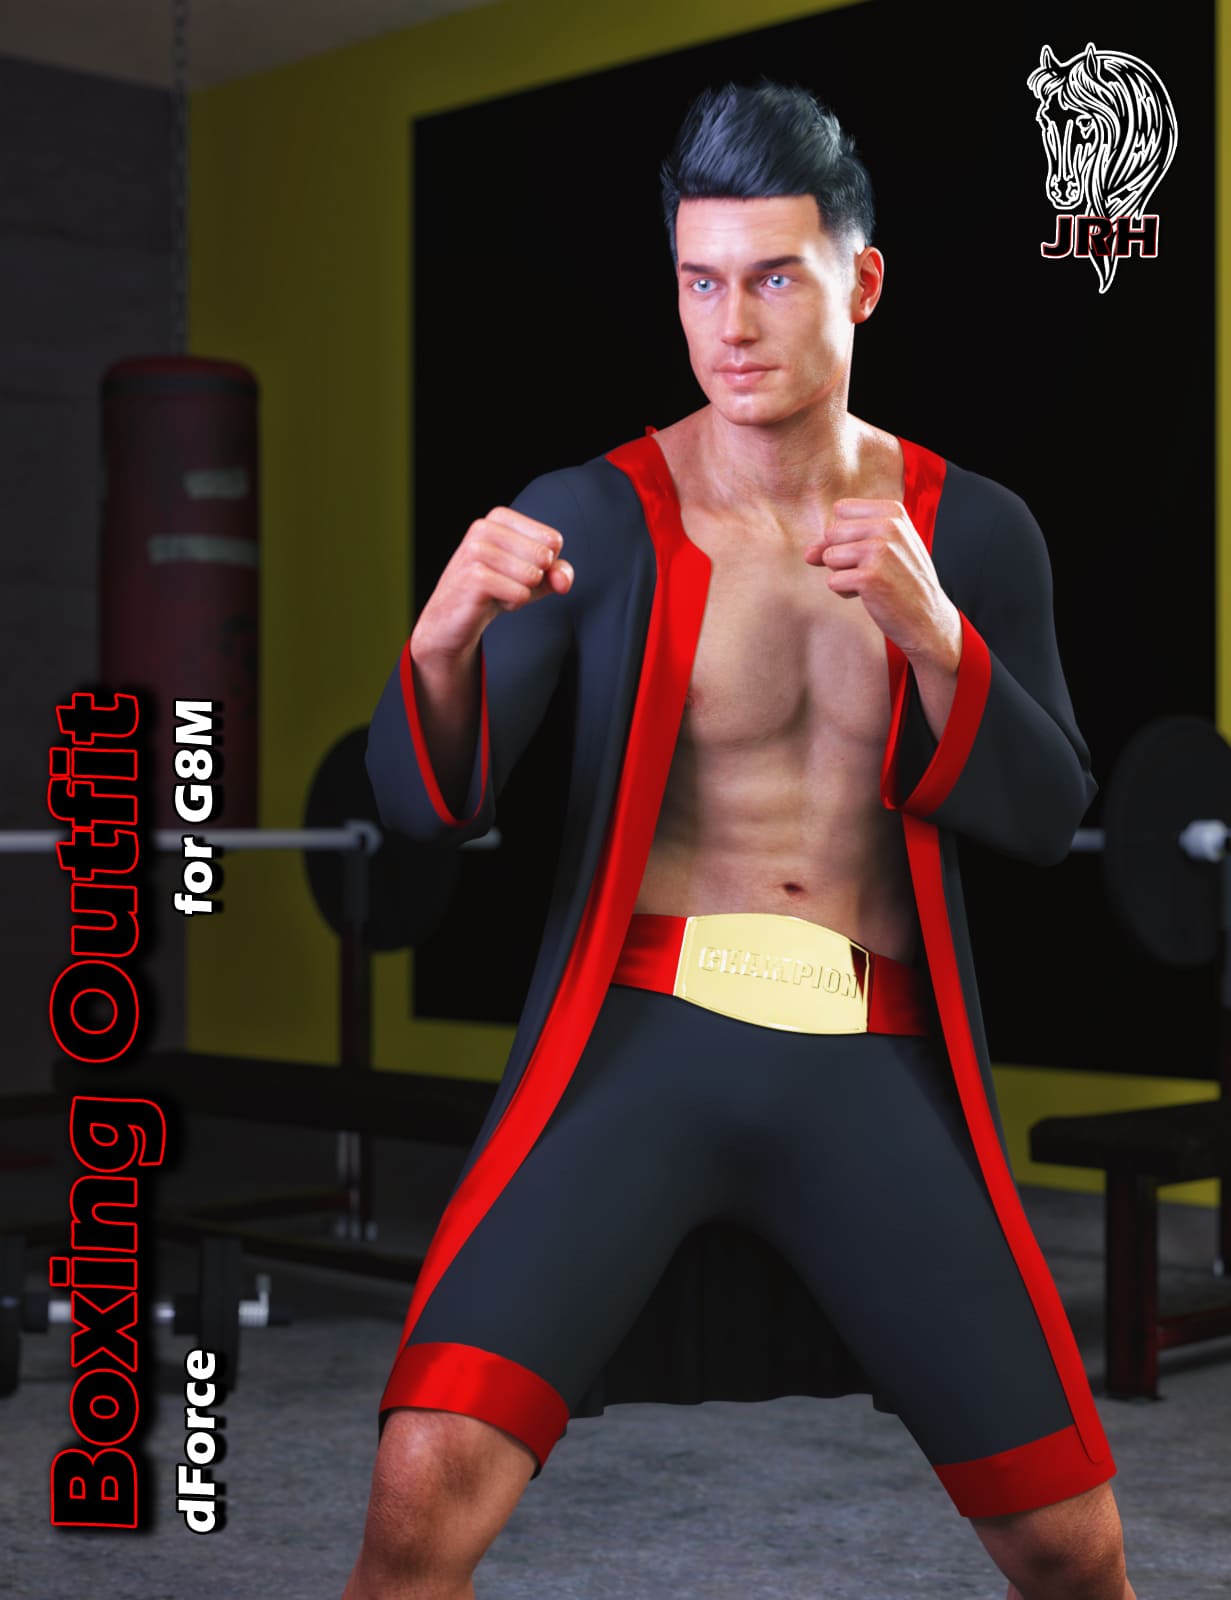 JRH dForce Boxing Outfit for G8M_DAZ3D下载站